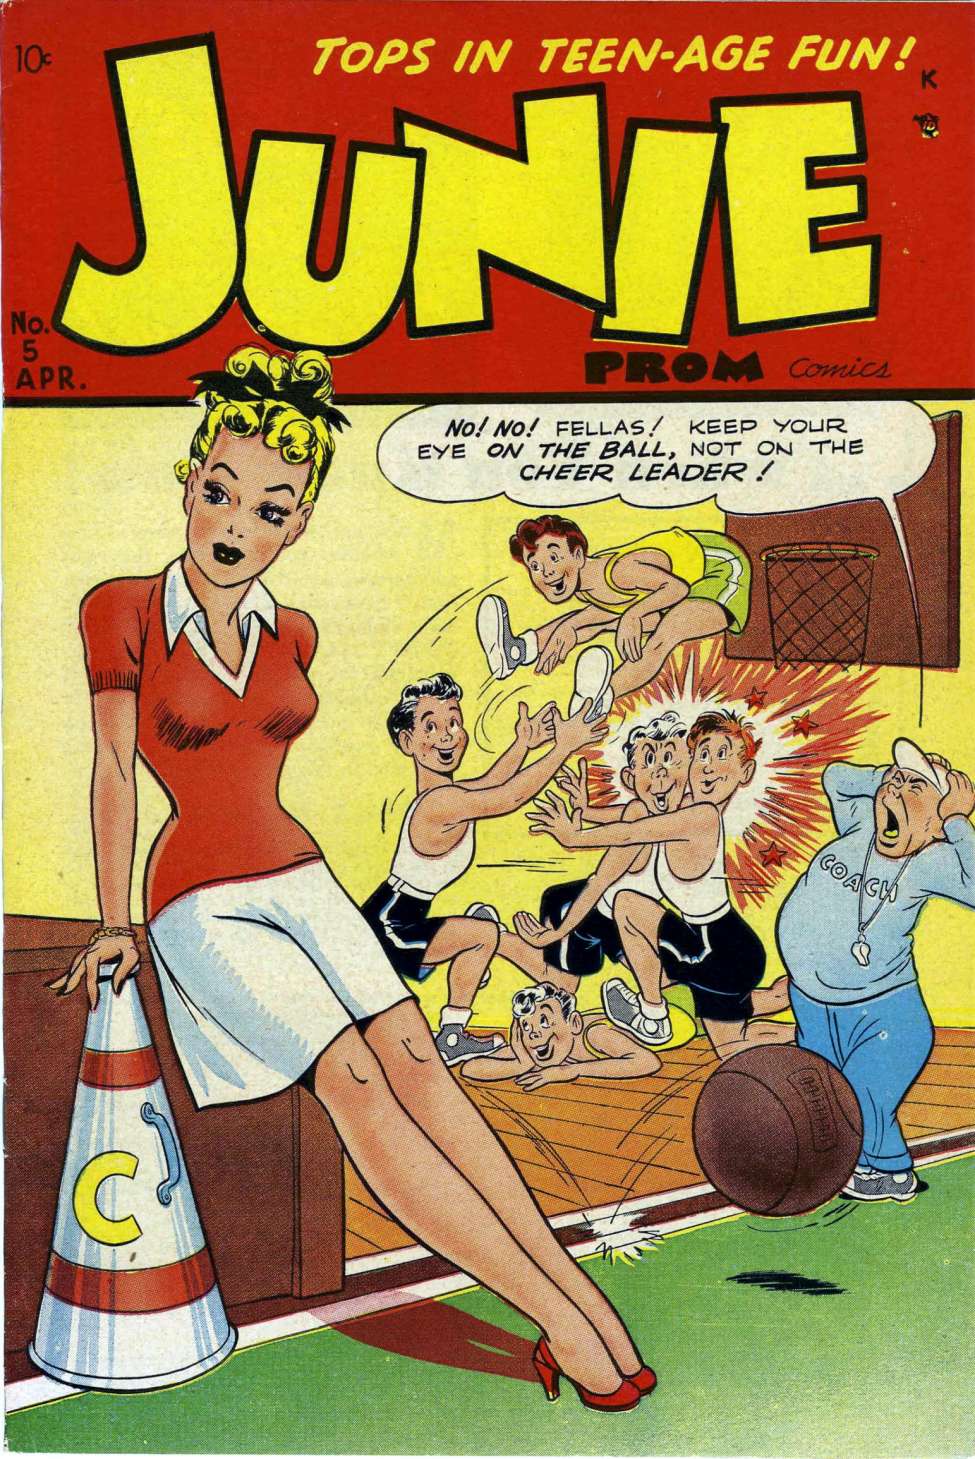 Book Cover For Junie Prom Comics 5